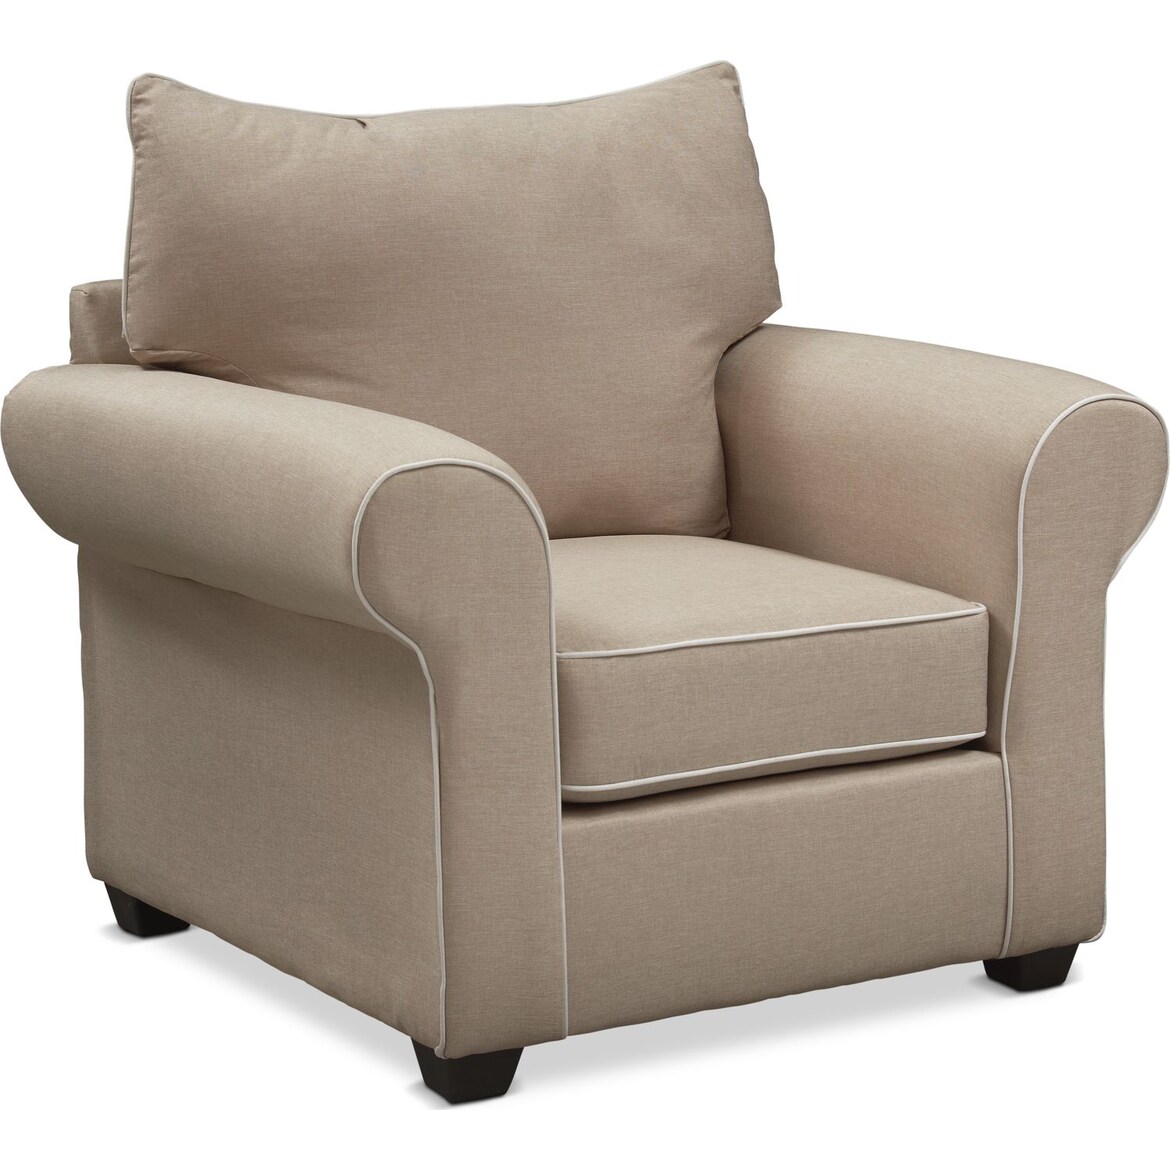 Carla Sofa Loveseat And Chair Set Value City Furniture And Mattresses 